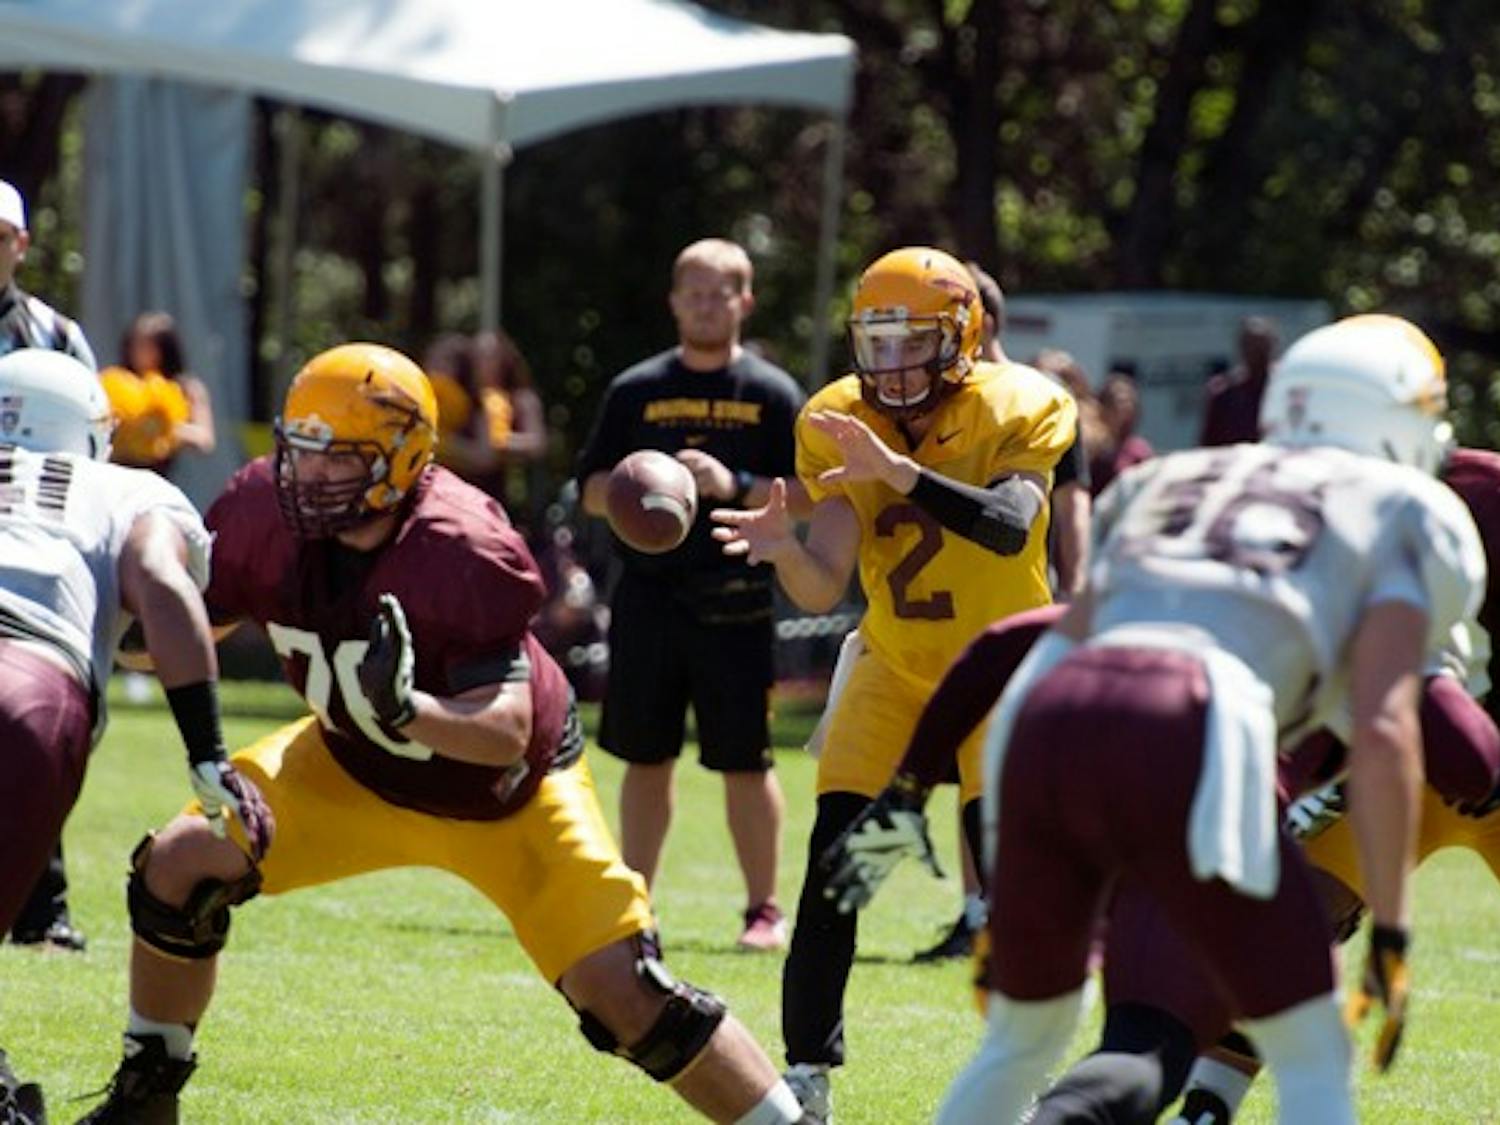 Redshirt junior quarterback Mike Bercovici takes the snap during a play at a scrimmage on Aug. 16. (Photo by Mario Mendez)